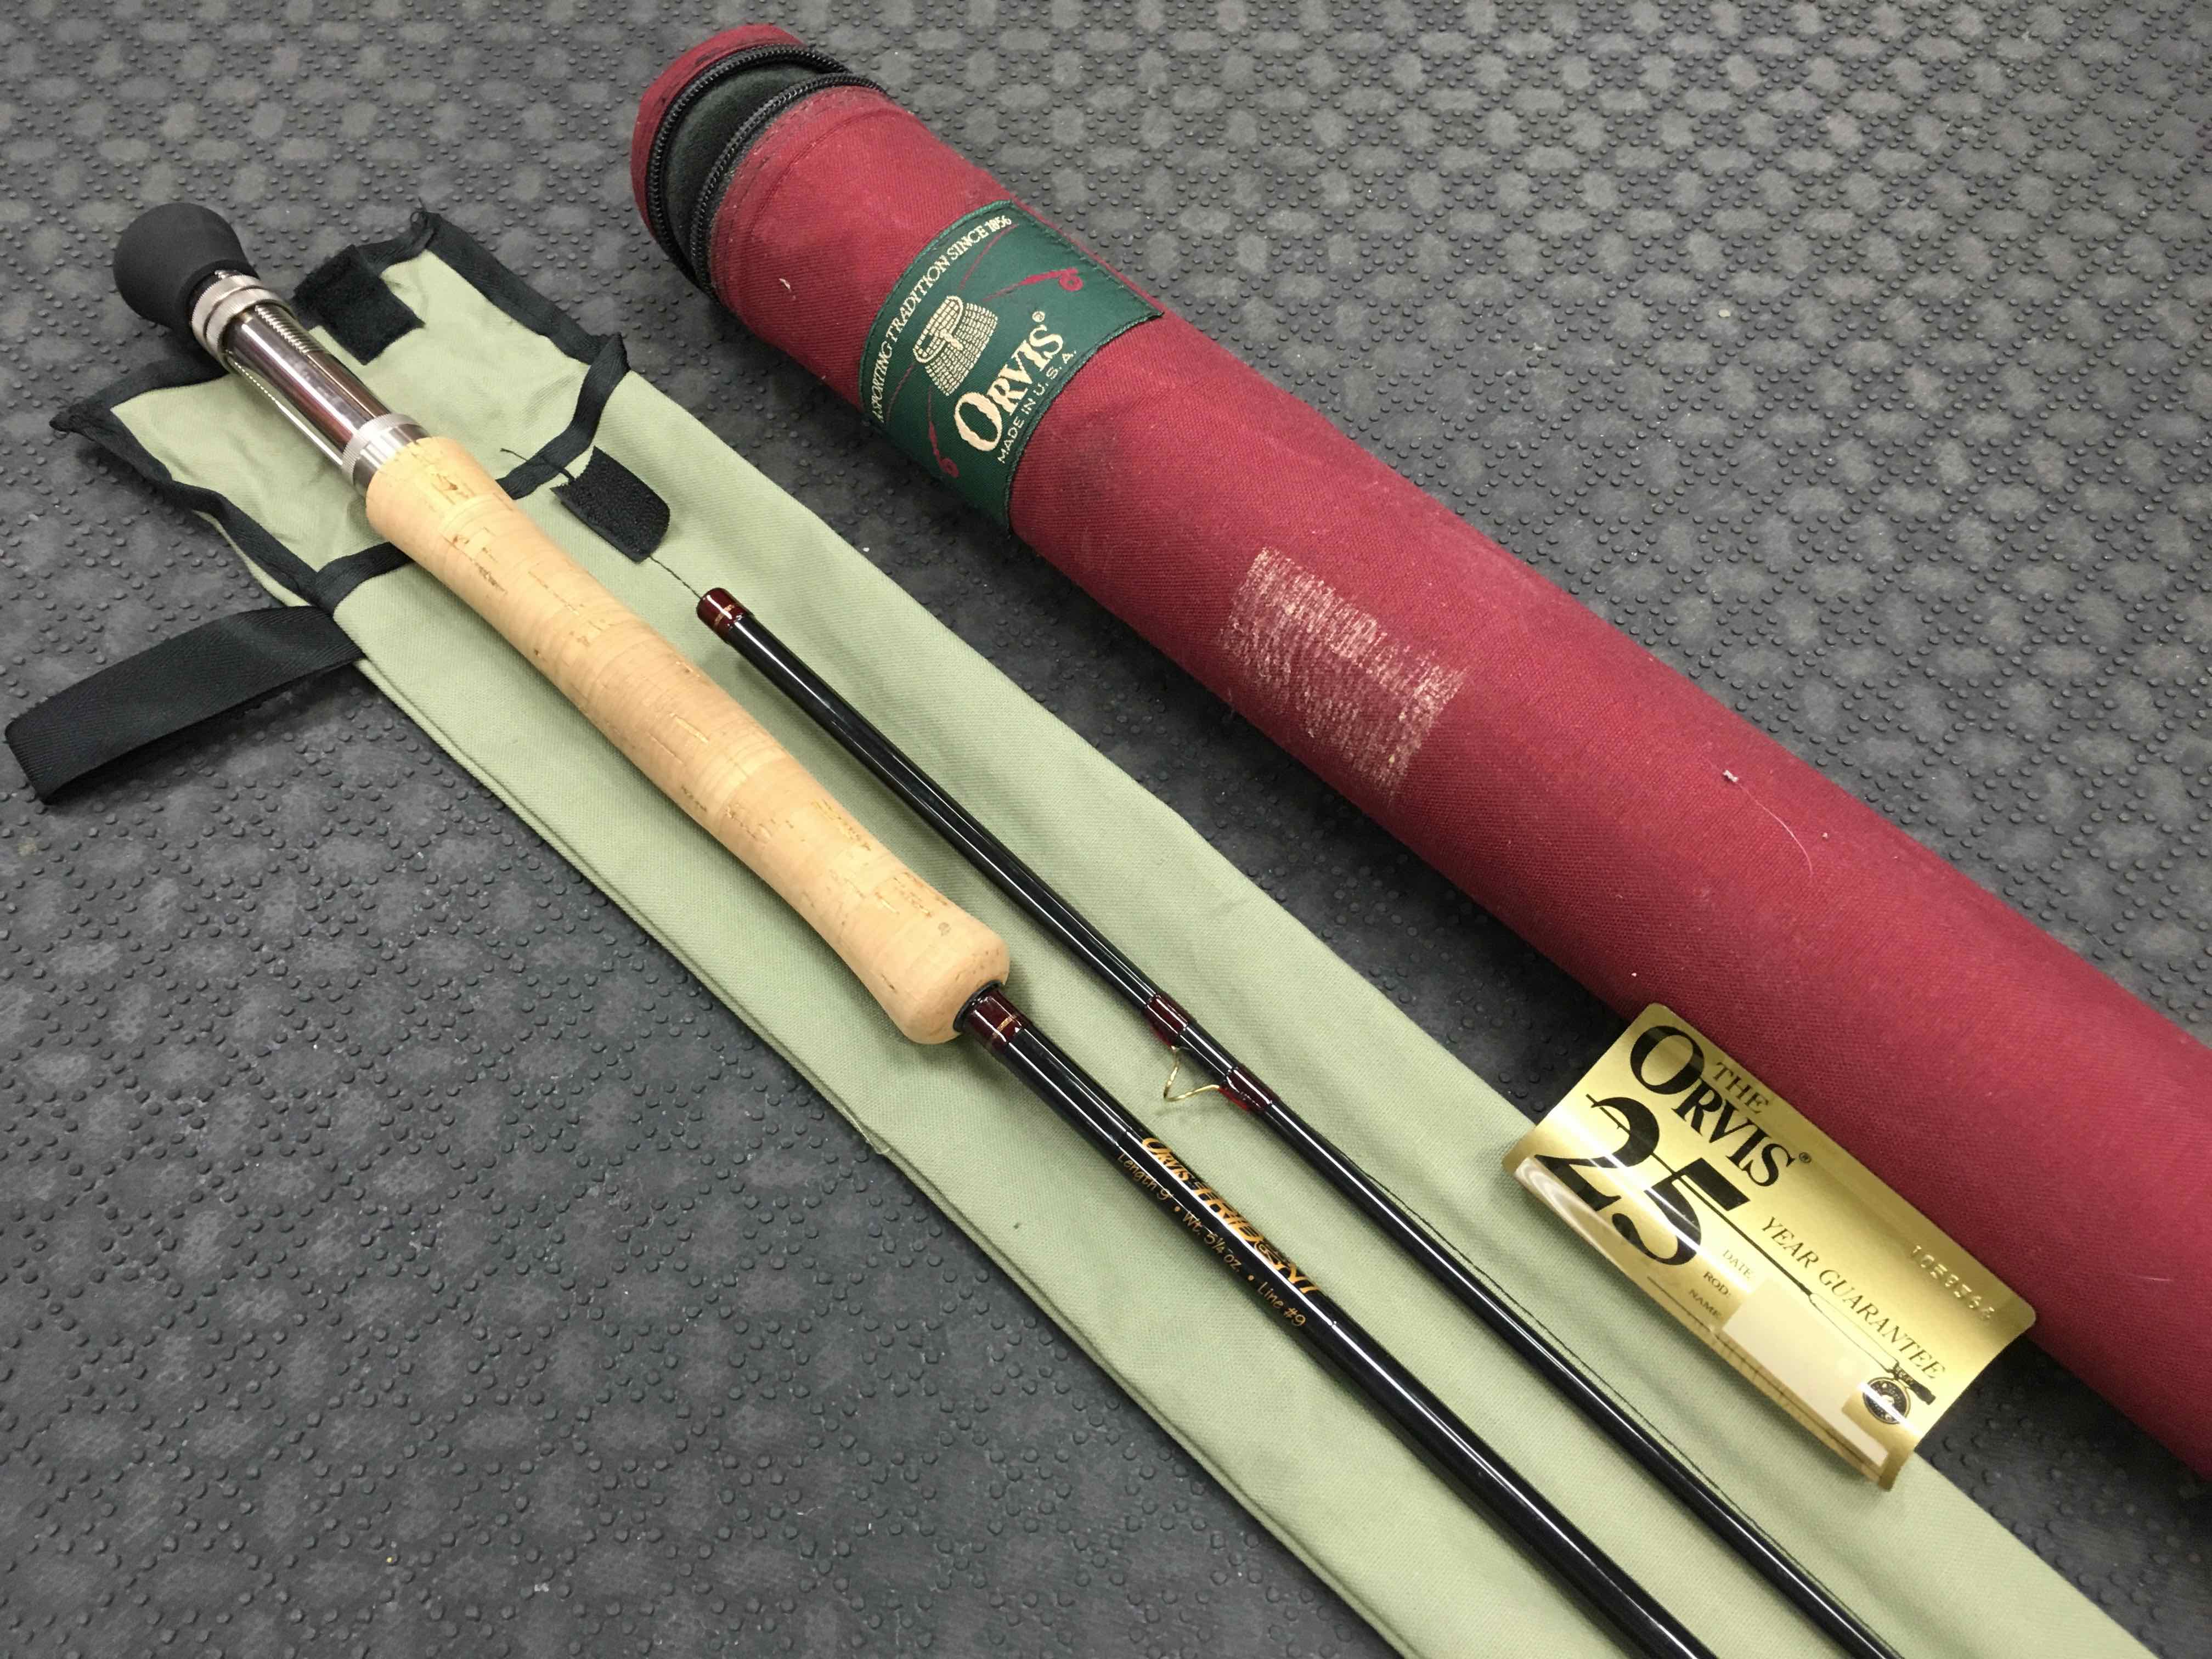 https://thefirstcast.ca/wp-content/uploads/2016/08/Orvis-Trident-909-9-foot-9wt-2pc-5-14oz-Fly-Rod-CC.jpg